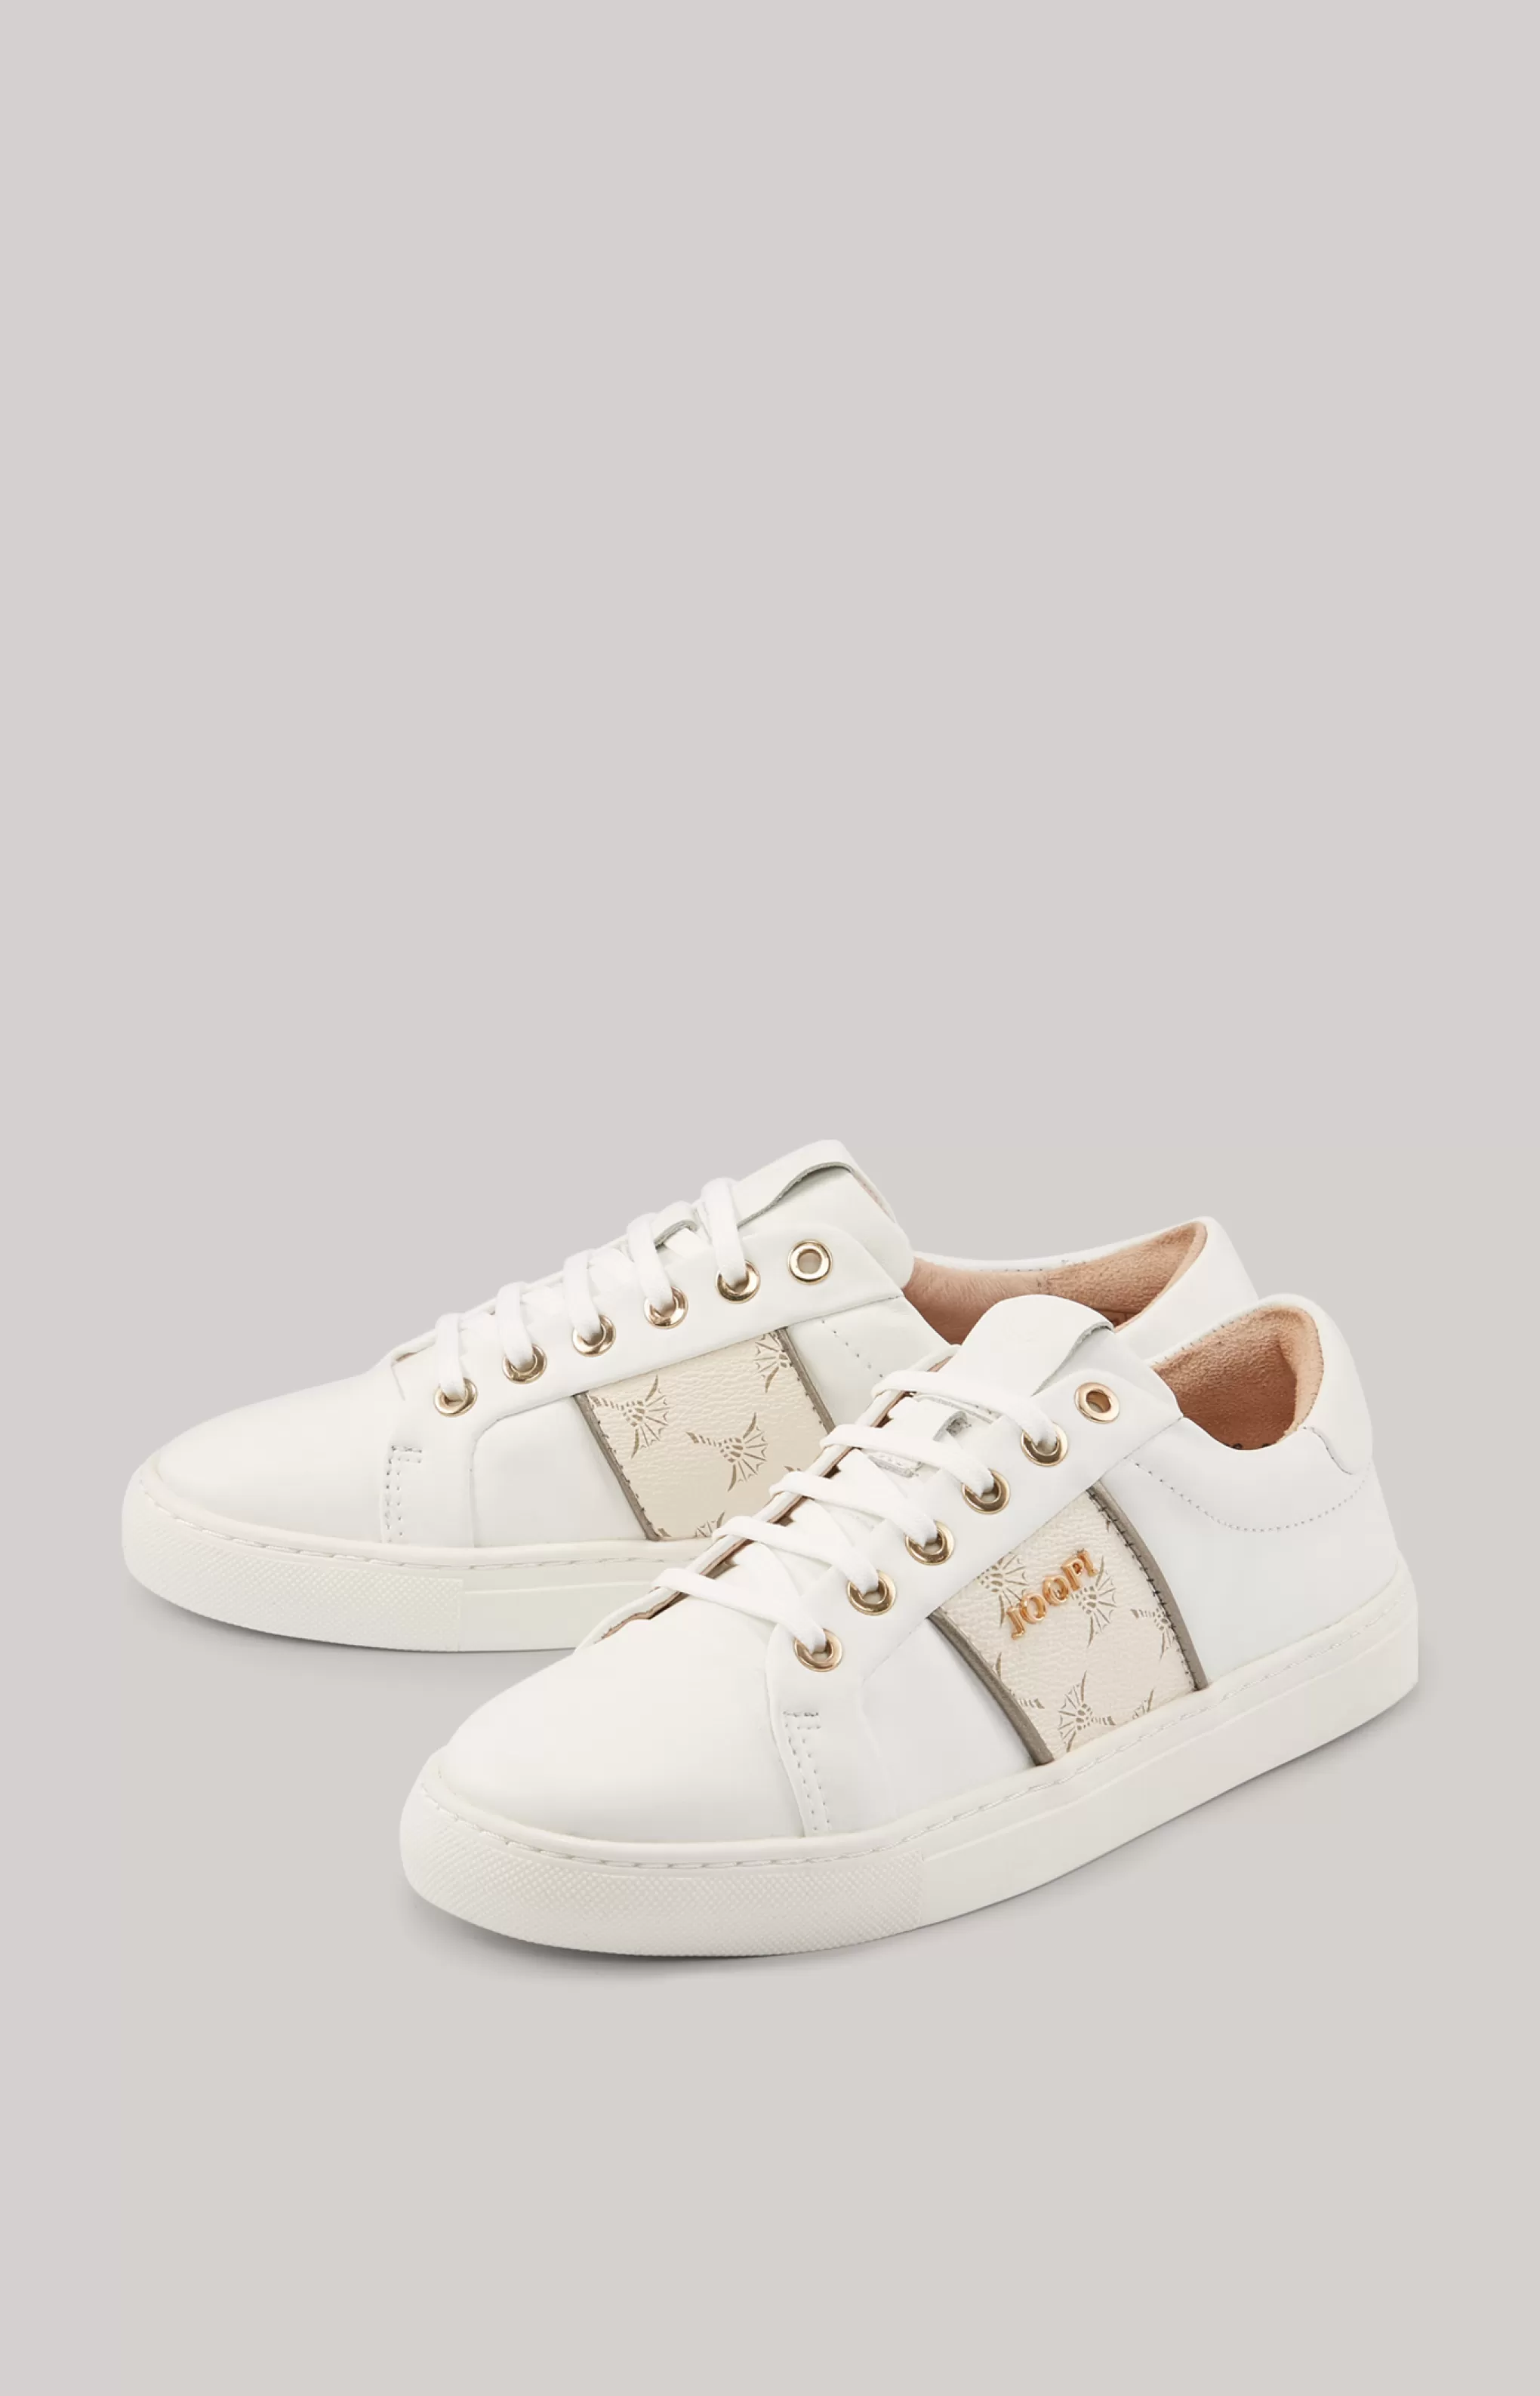 Shoes*JOOP Shoes Cortina Lista Coralie Trainers in Off-white/Rosé